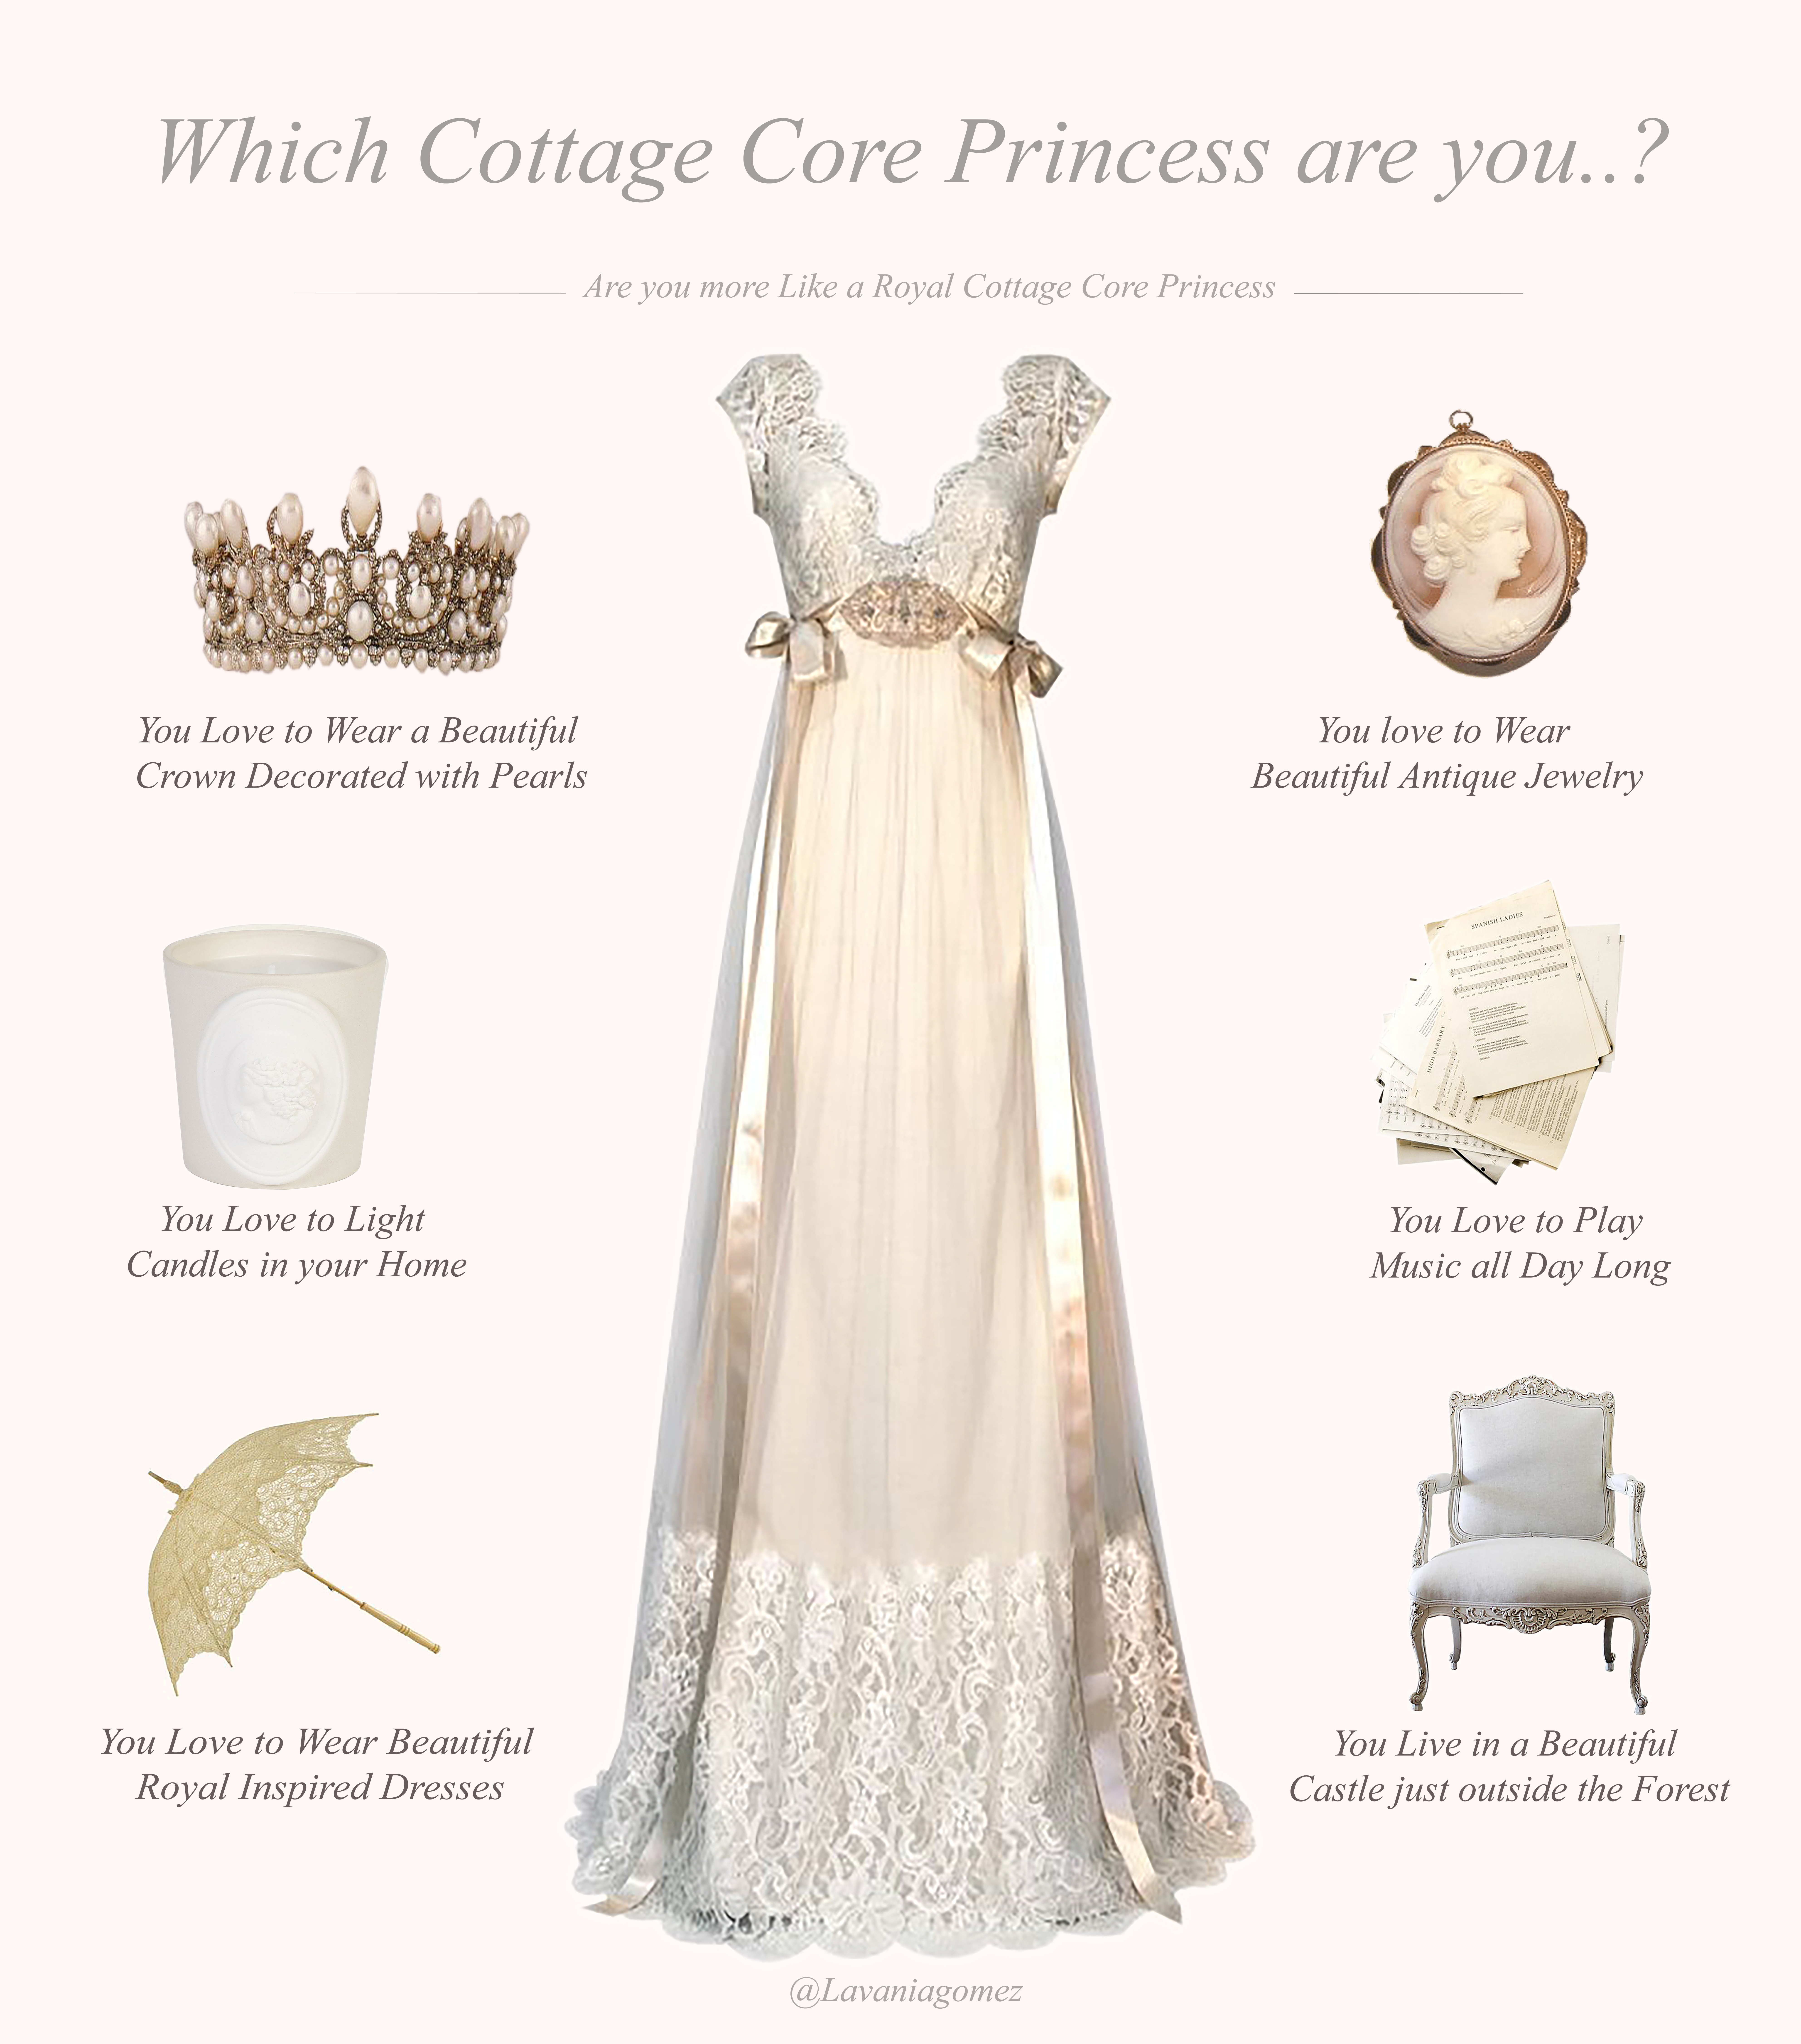 Are you More Like a Royal Cottage Core Princess